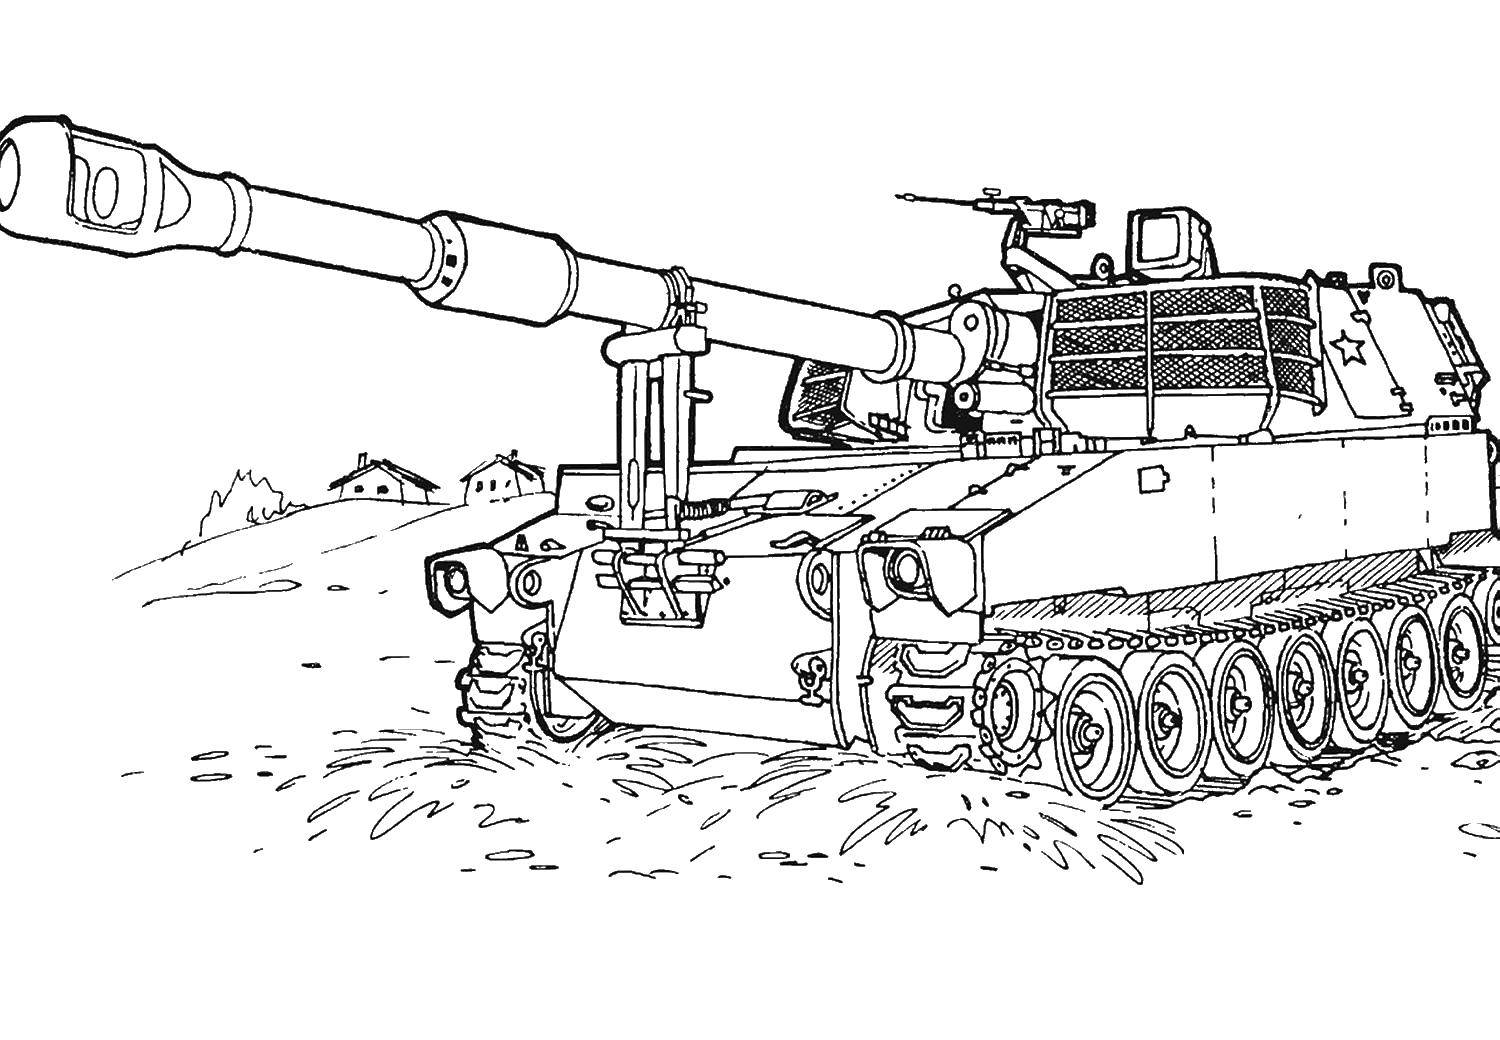 Coloring Tank type 74. Category military coloring pages. Tags:  tank.